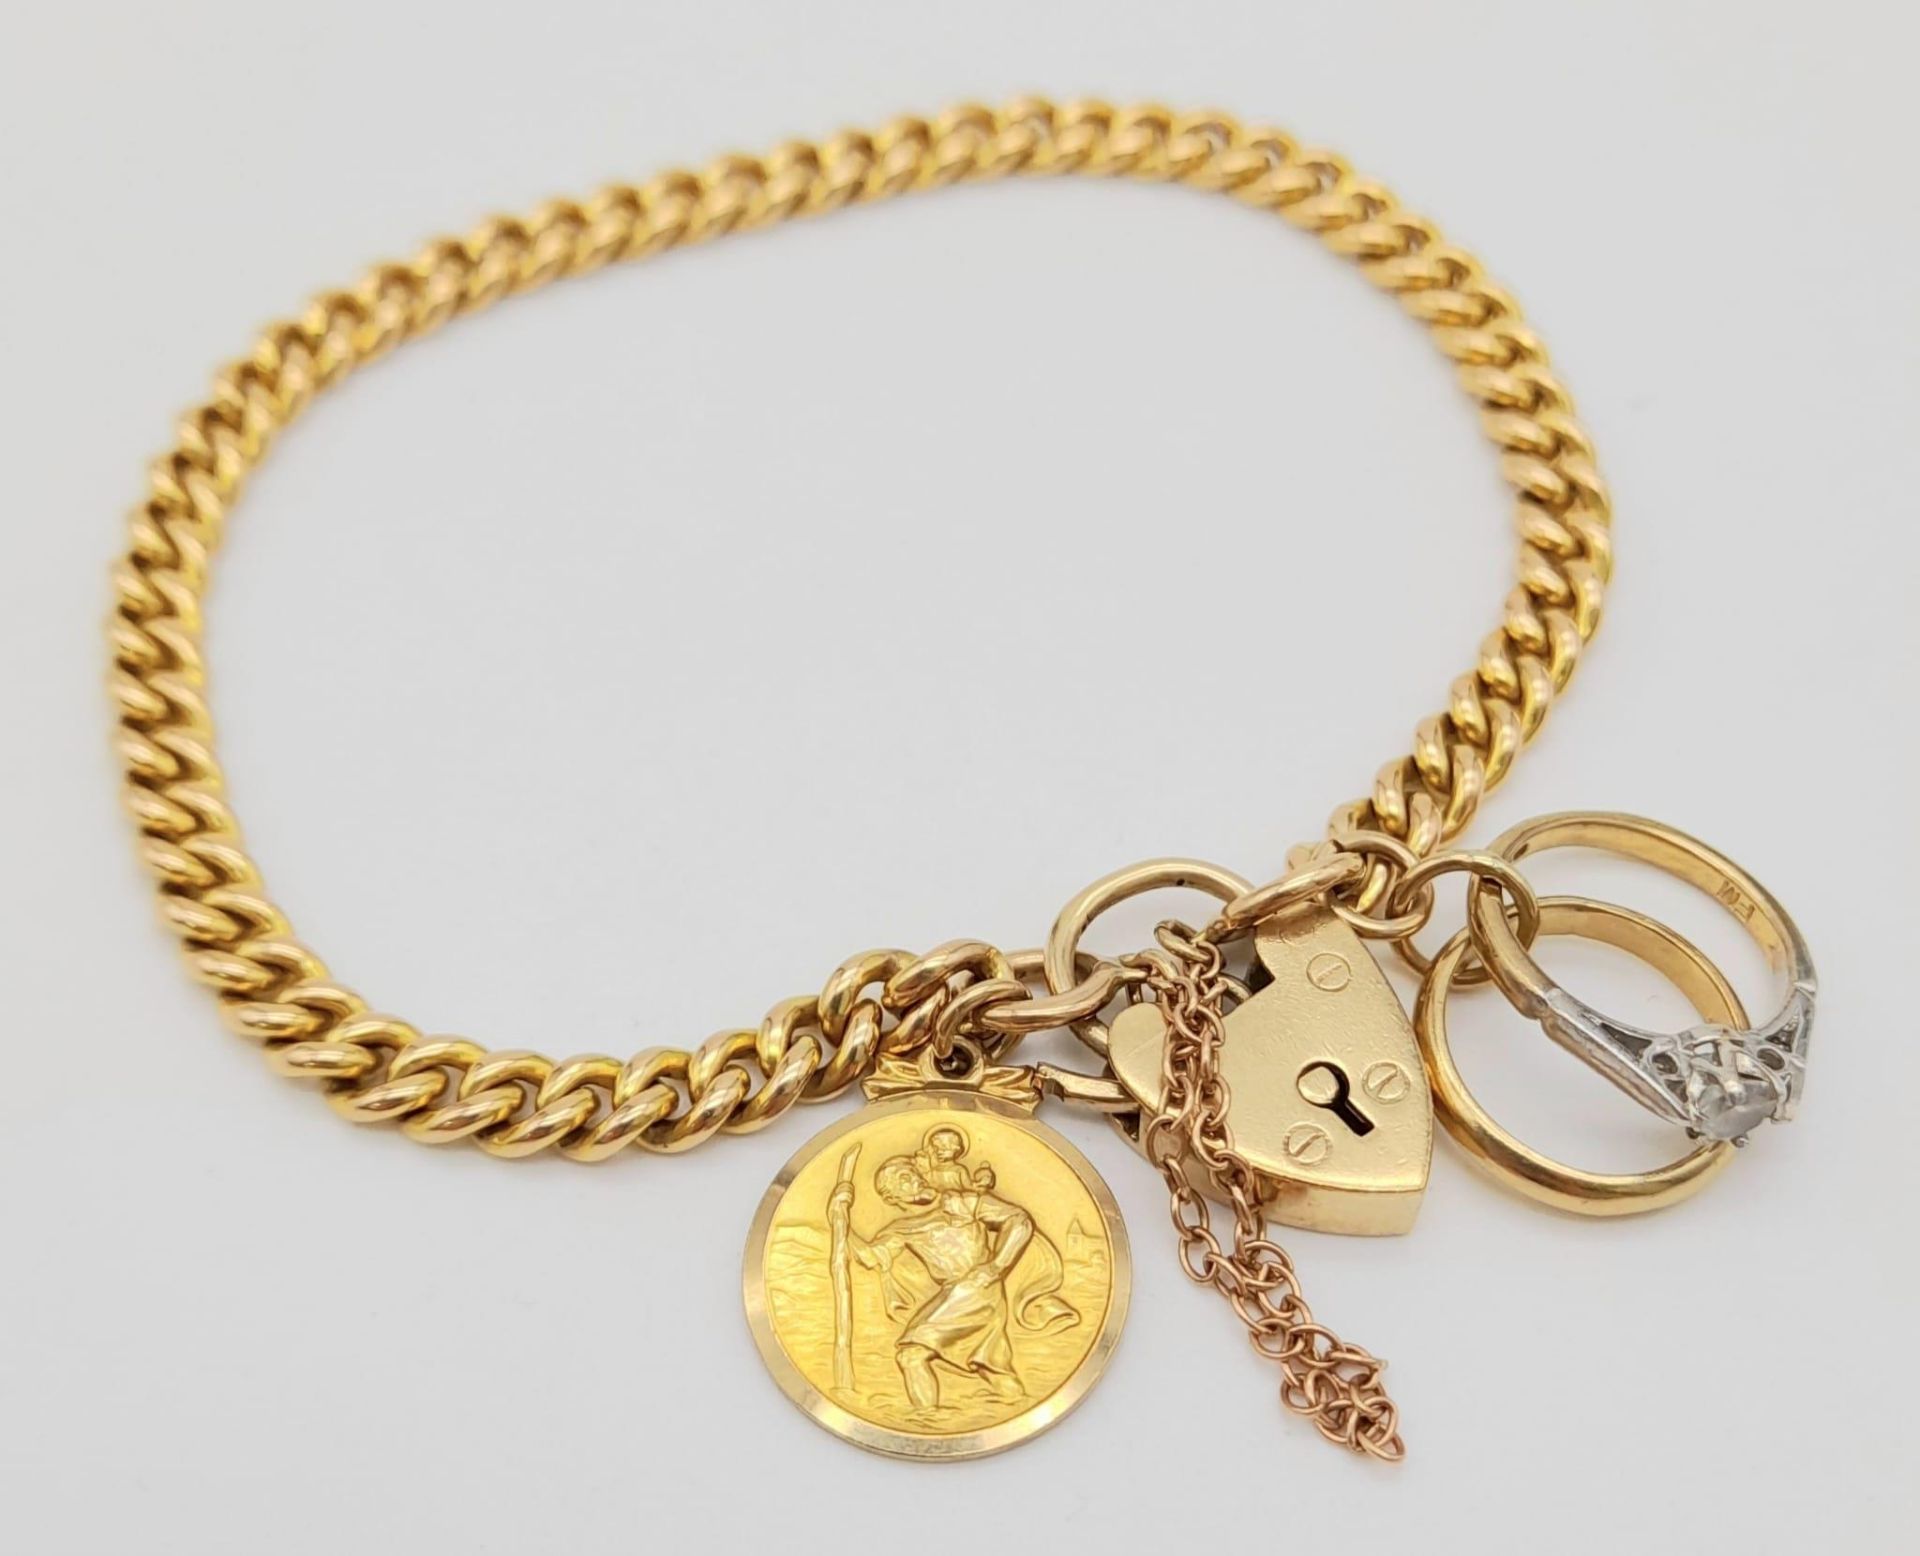 A Vintage 9K Yellow Gold Bracelet with Three 9K Yellow Gold Charms and a Heart Clasp. All links